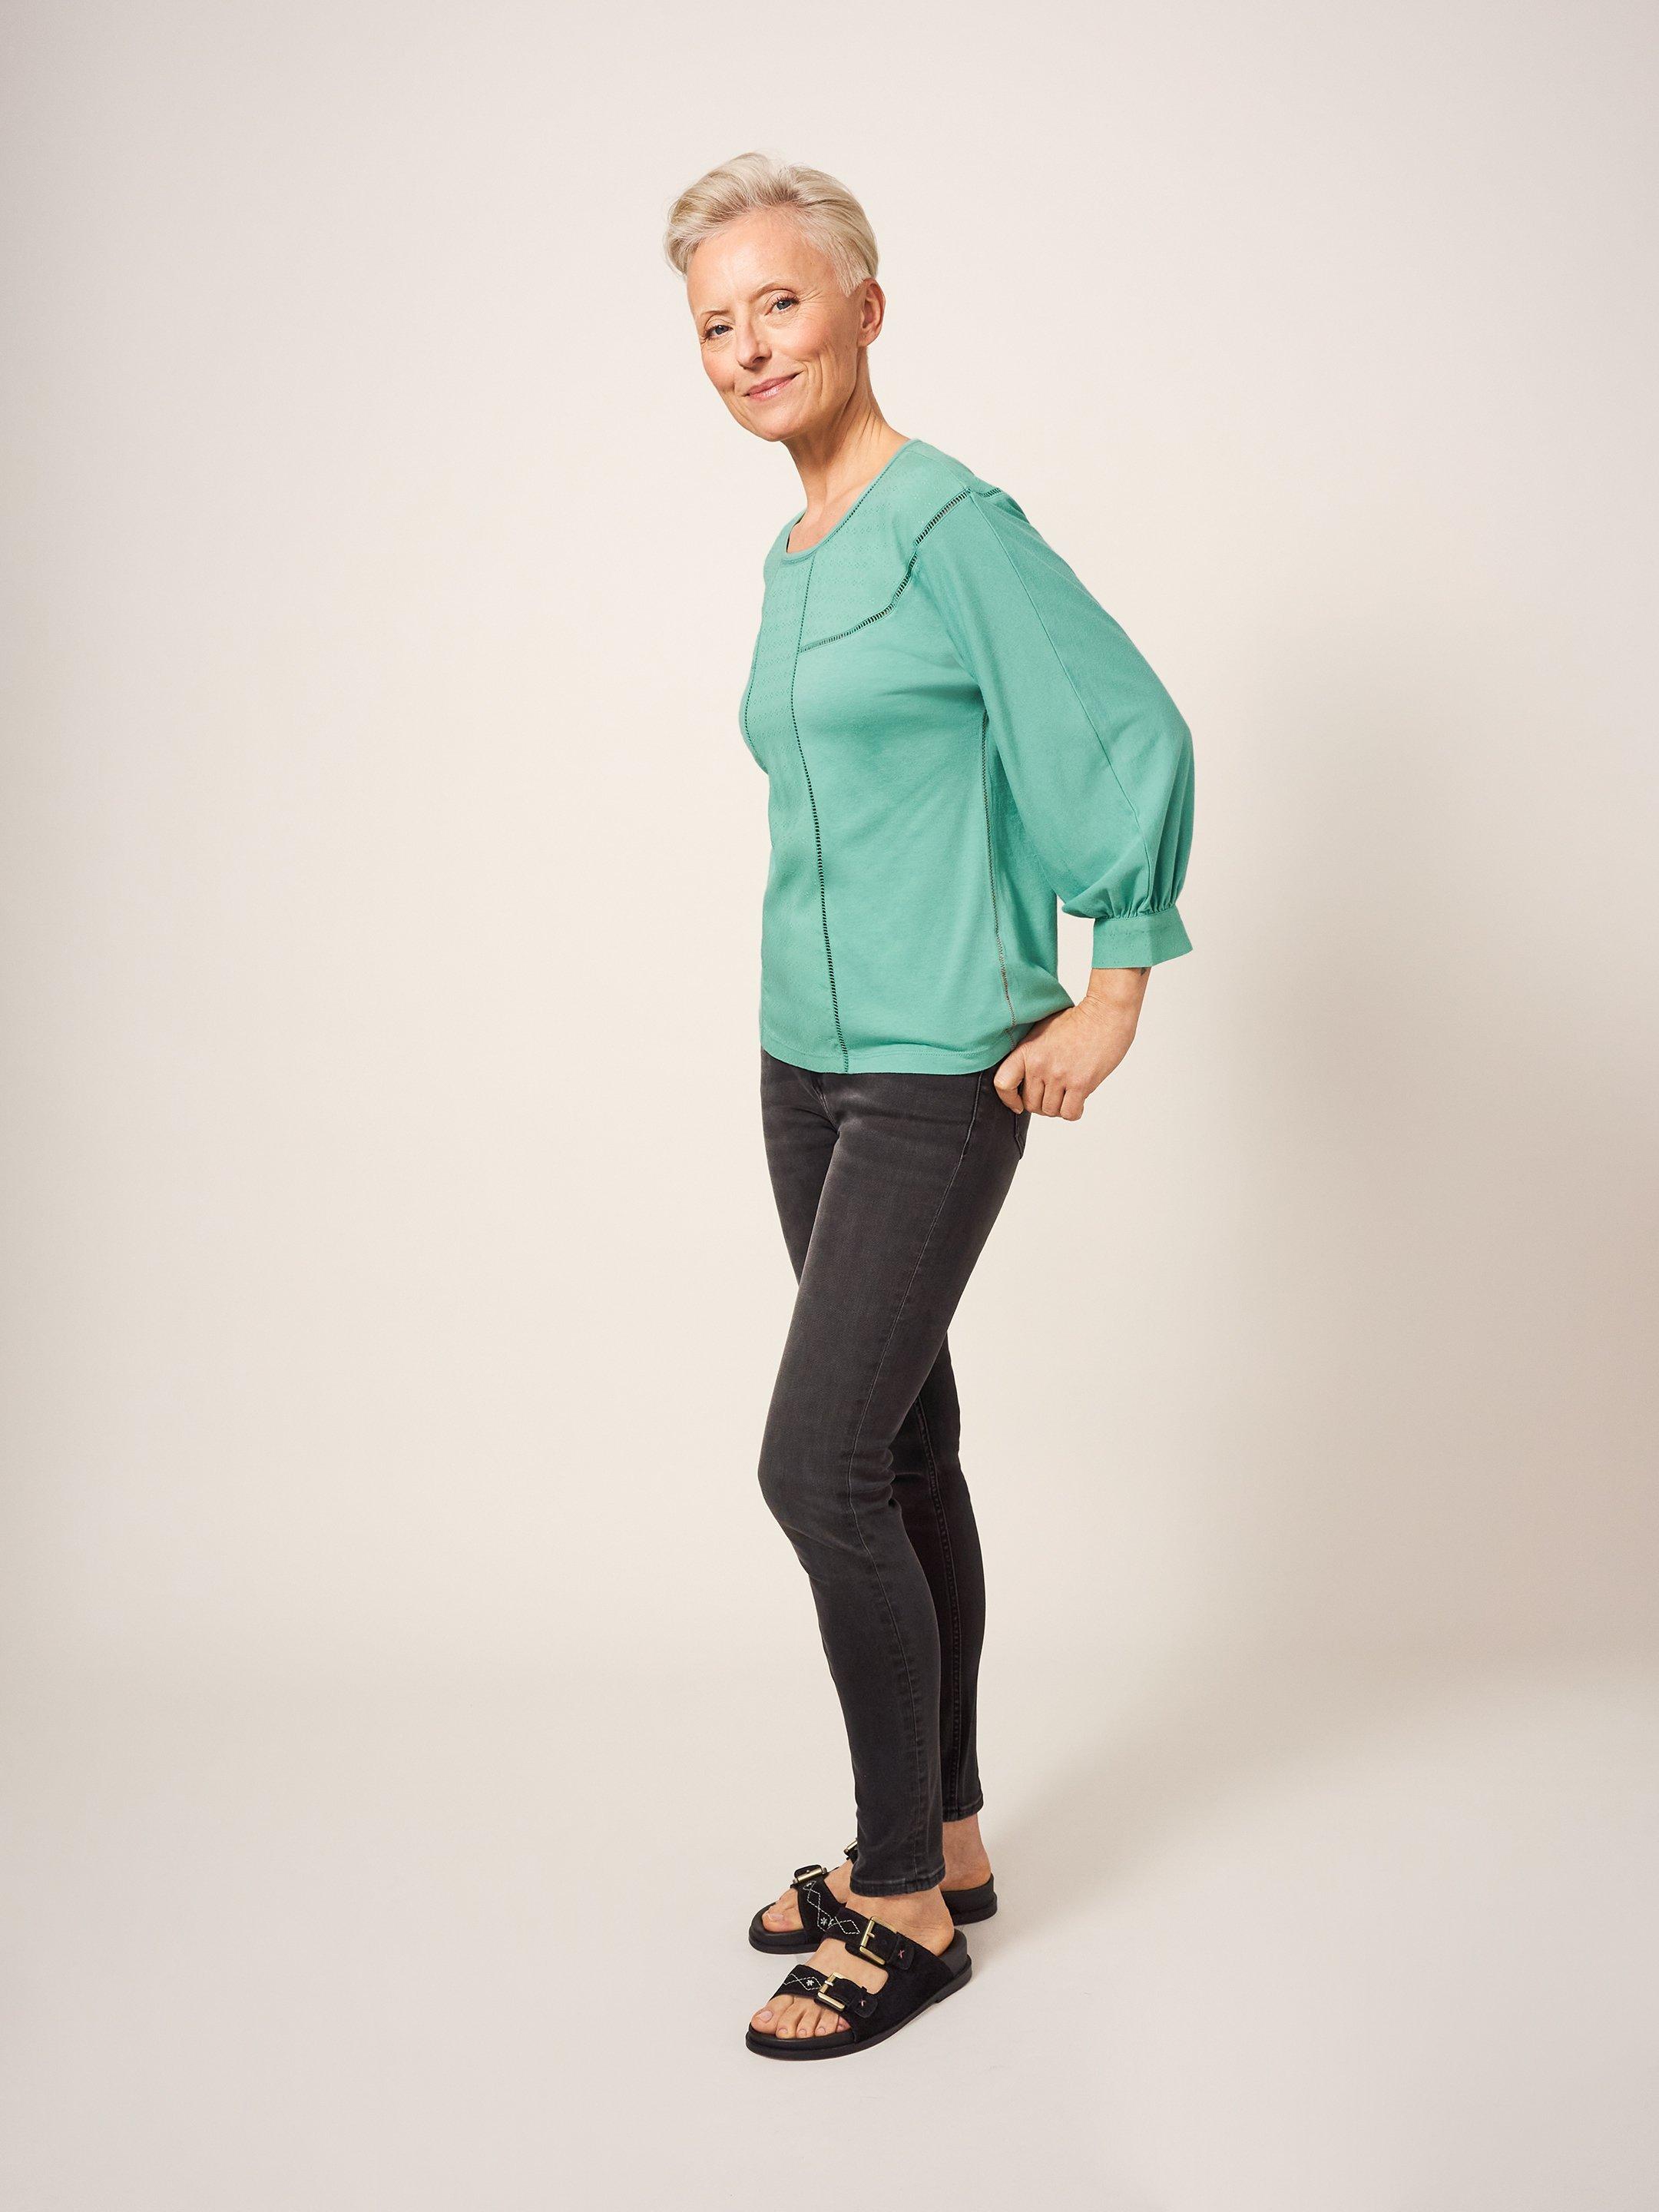 MOLLIE JERSEY MIX TOP in MID TEAL - MODEL FRONT